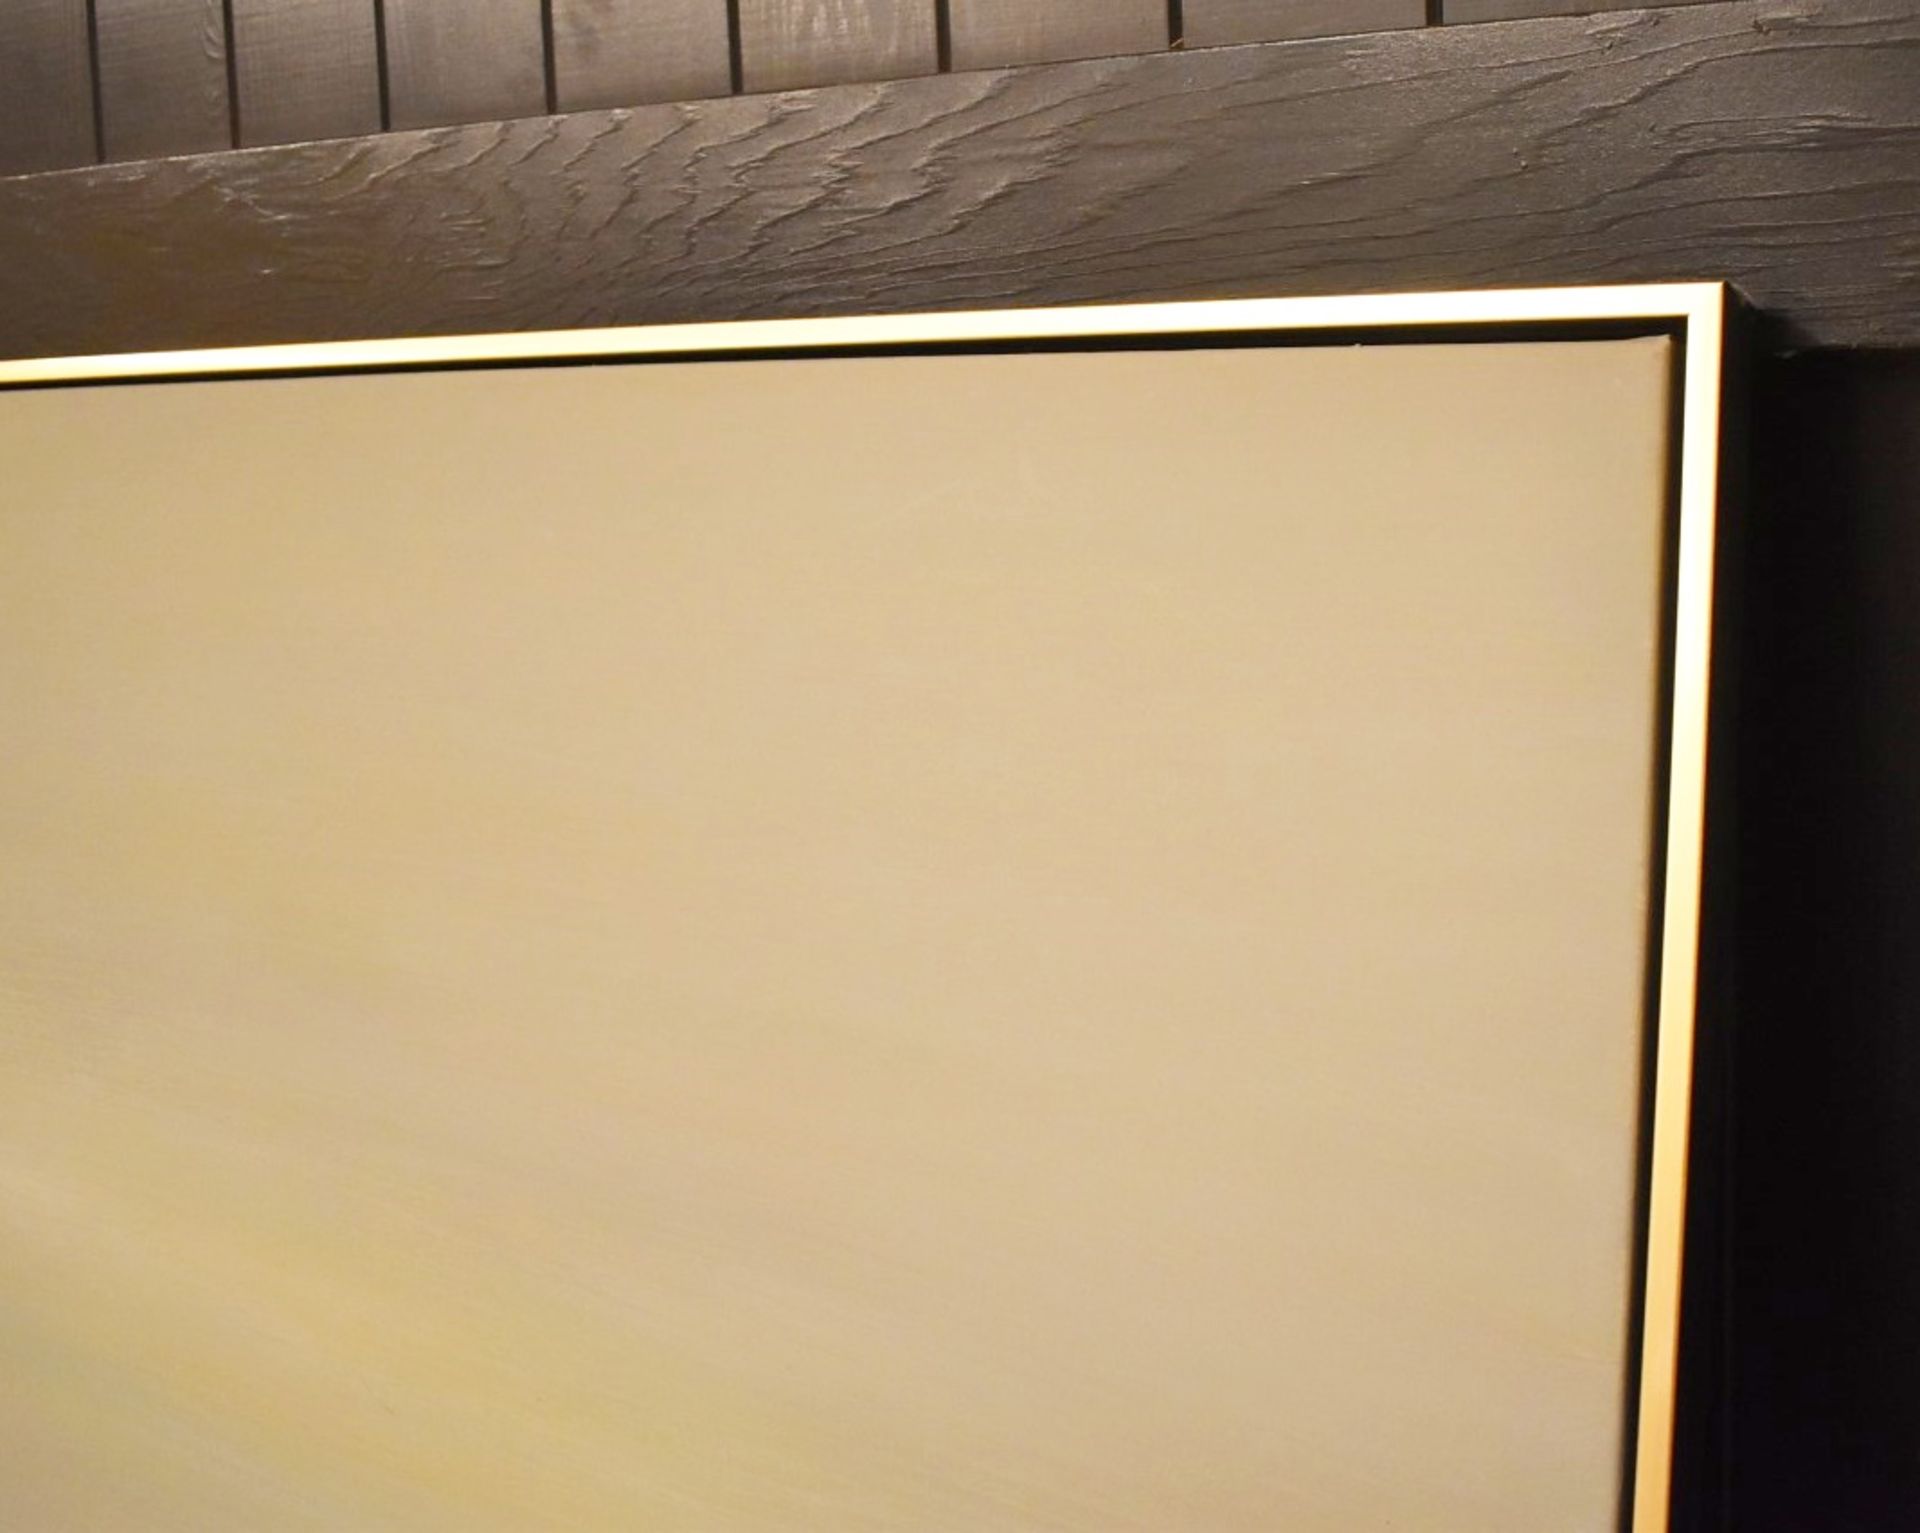 1 x Dusk Canvas Hand Painted Wall Art in Gold Frame - Large Size - RRP £255 - NO VAT ON THE HAMMER! - Image 6 of 8